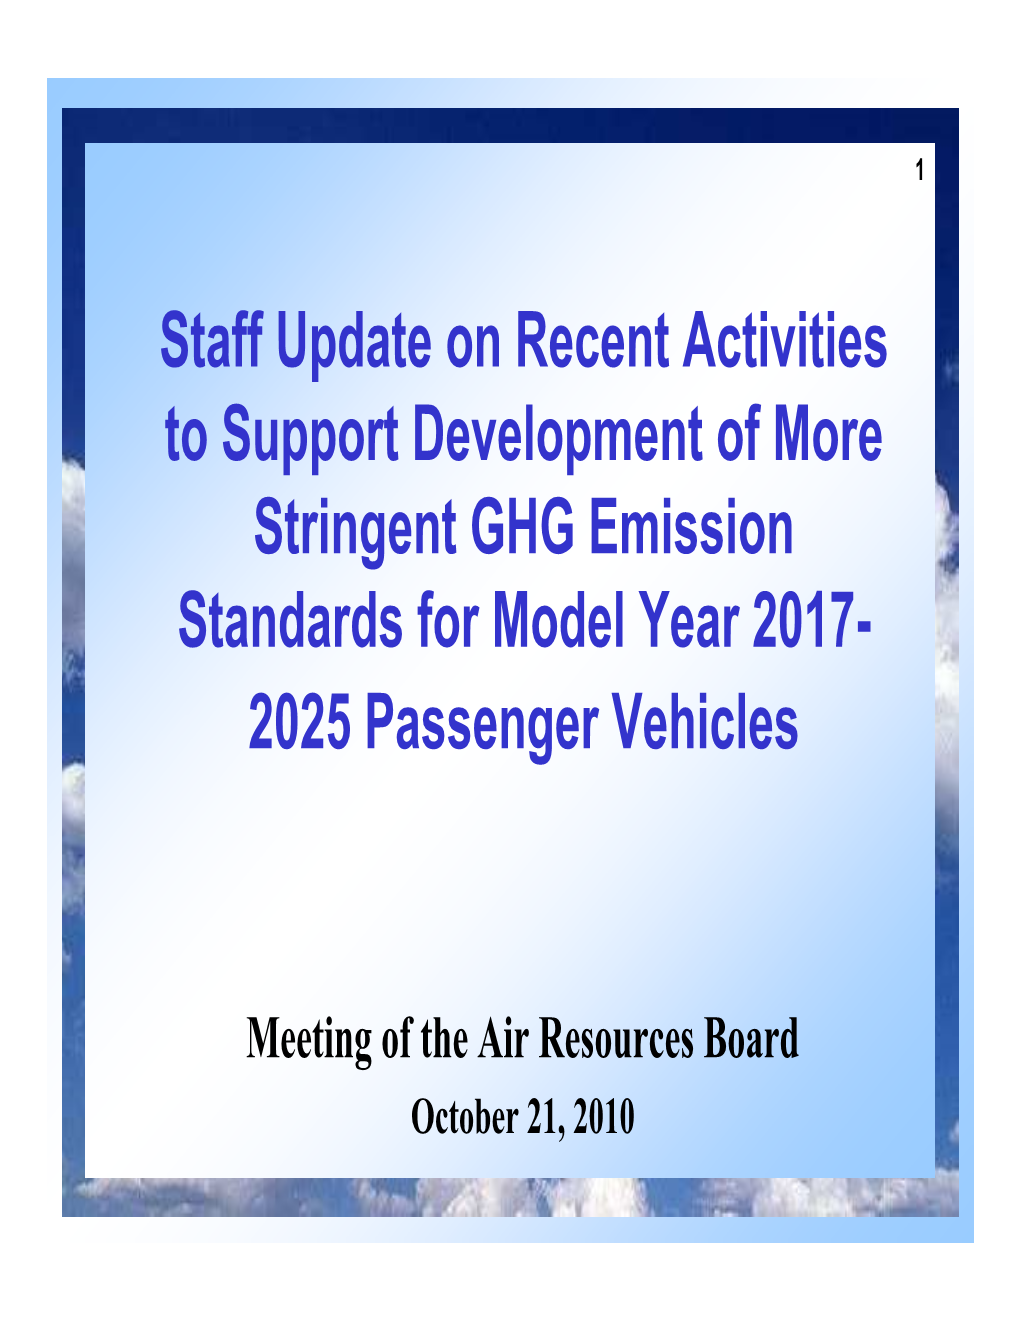 Staff Update on Recent Activities to Support Development of More Stringent GHG Emission Standards for Model Year 2017- 2025 Passenger Vehicles